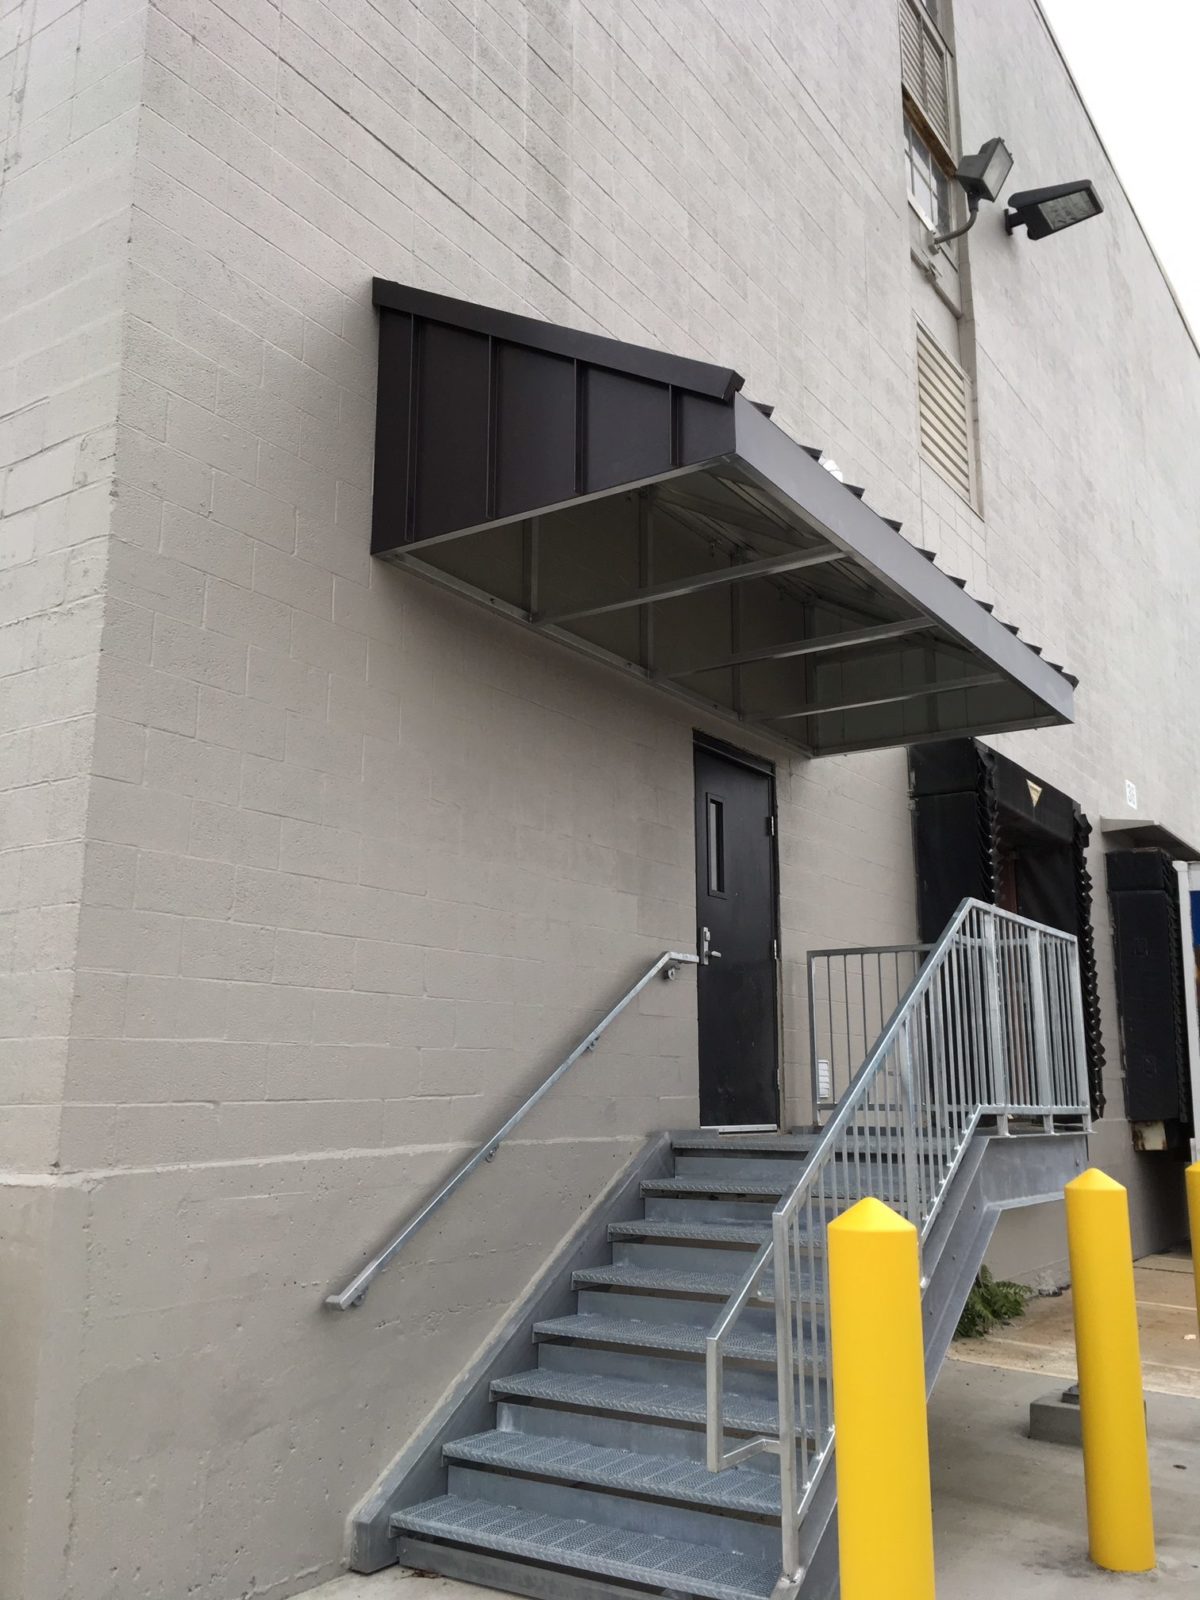 Commercial Metal Awnings & Commercial Canopies Canopy Replacement Outdoor Canopy